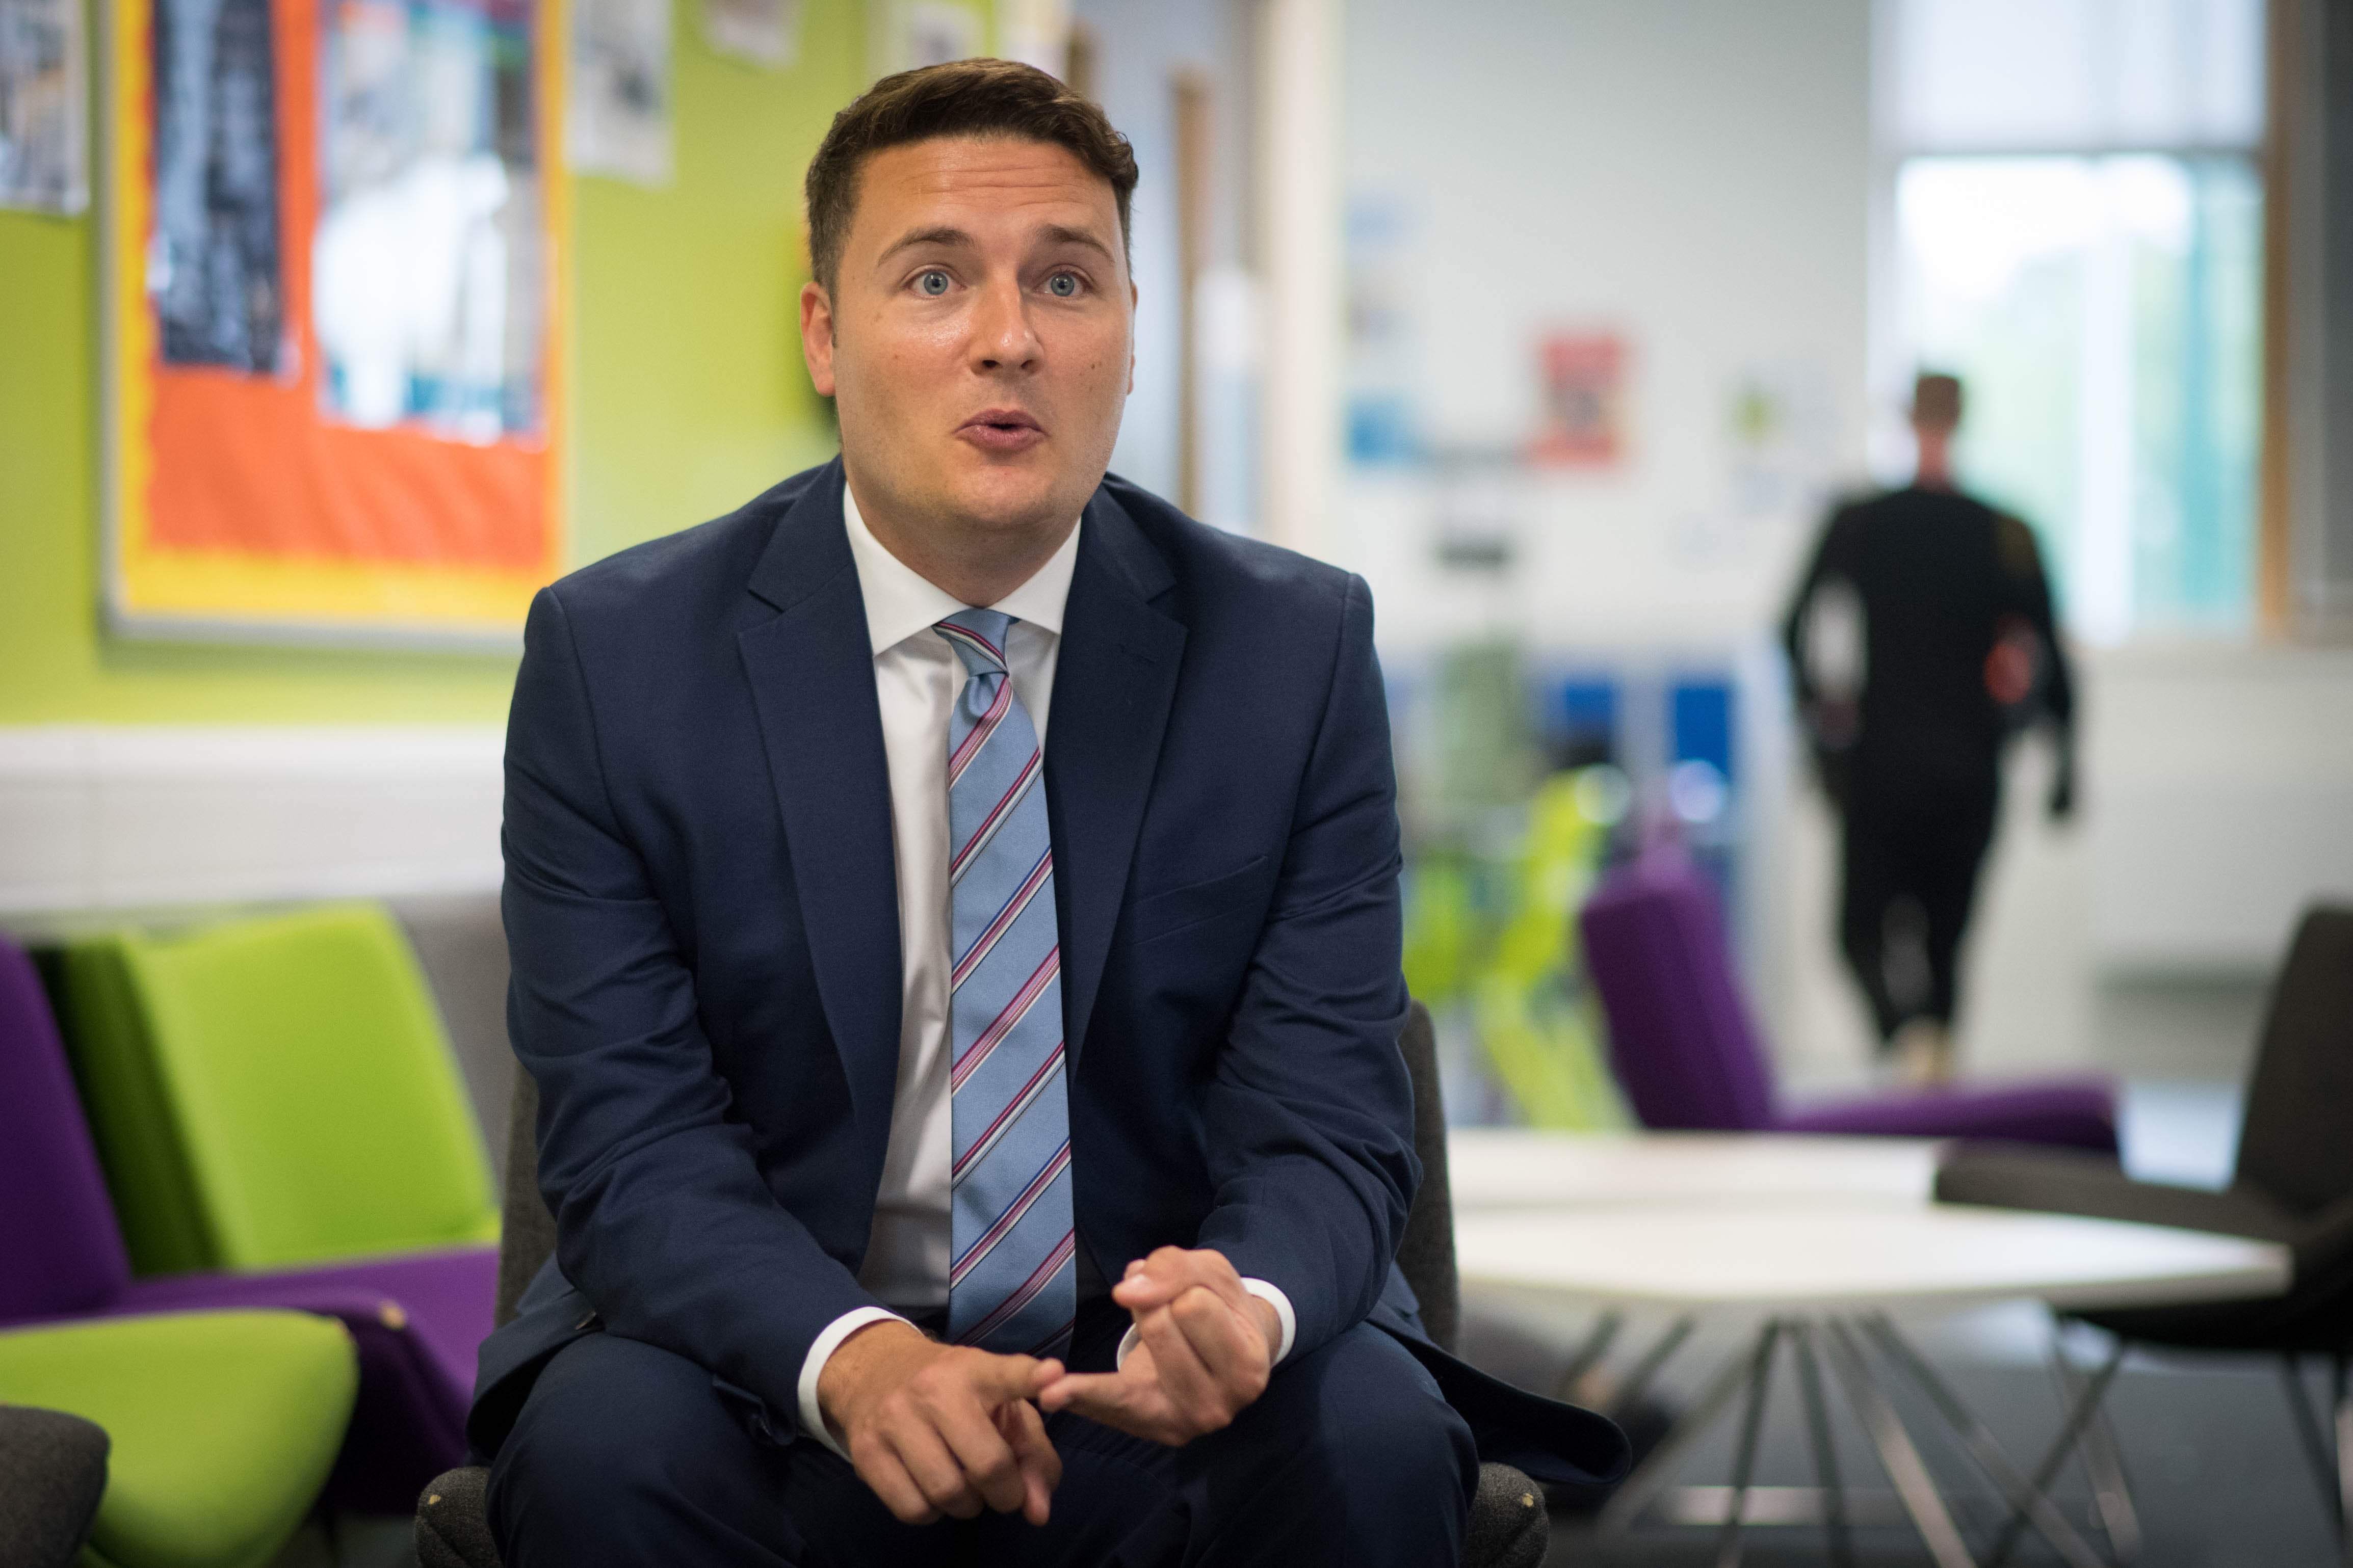 There is, at the moment, no escape from Wes Streeting